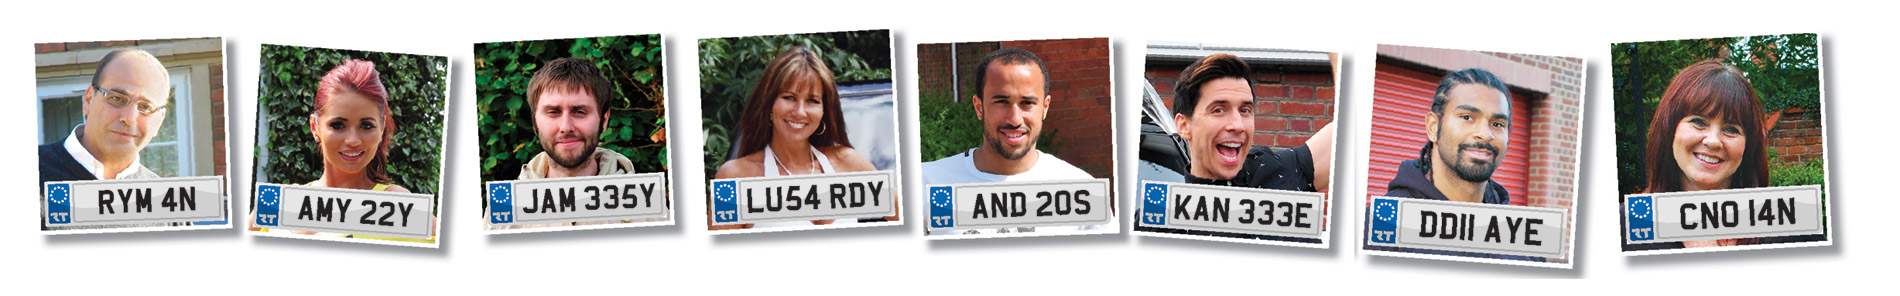 The celebrities that bought name numberplates from Regtransfers